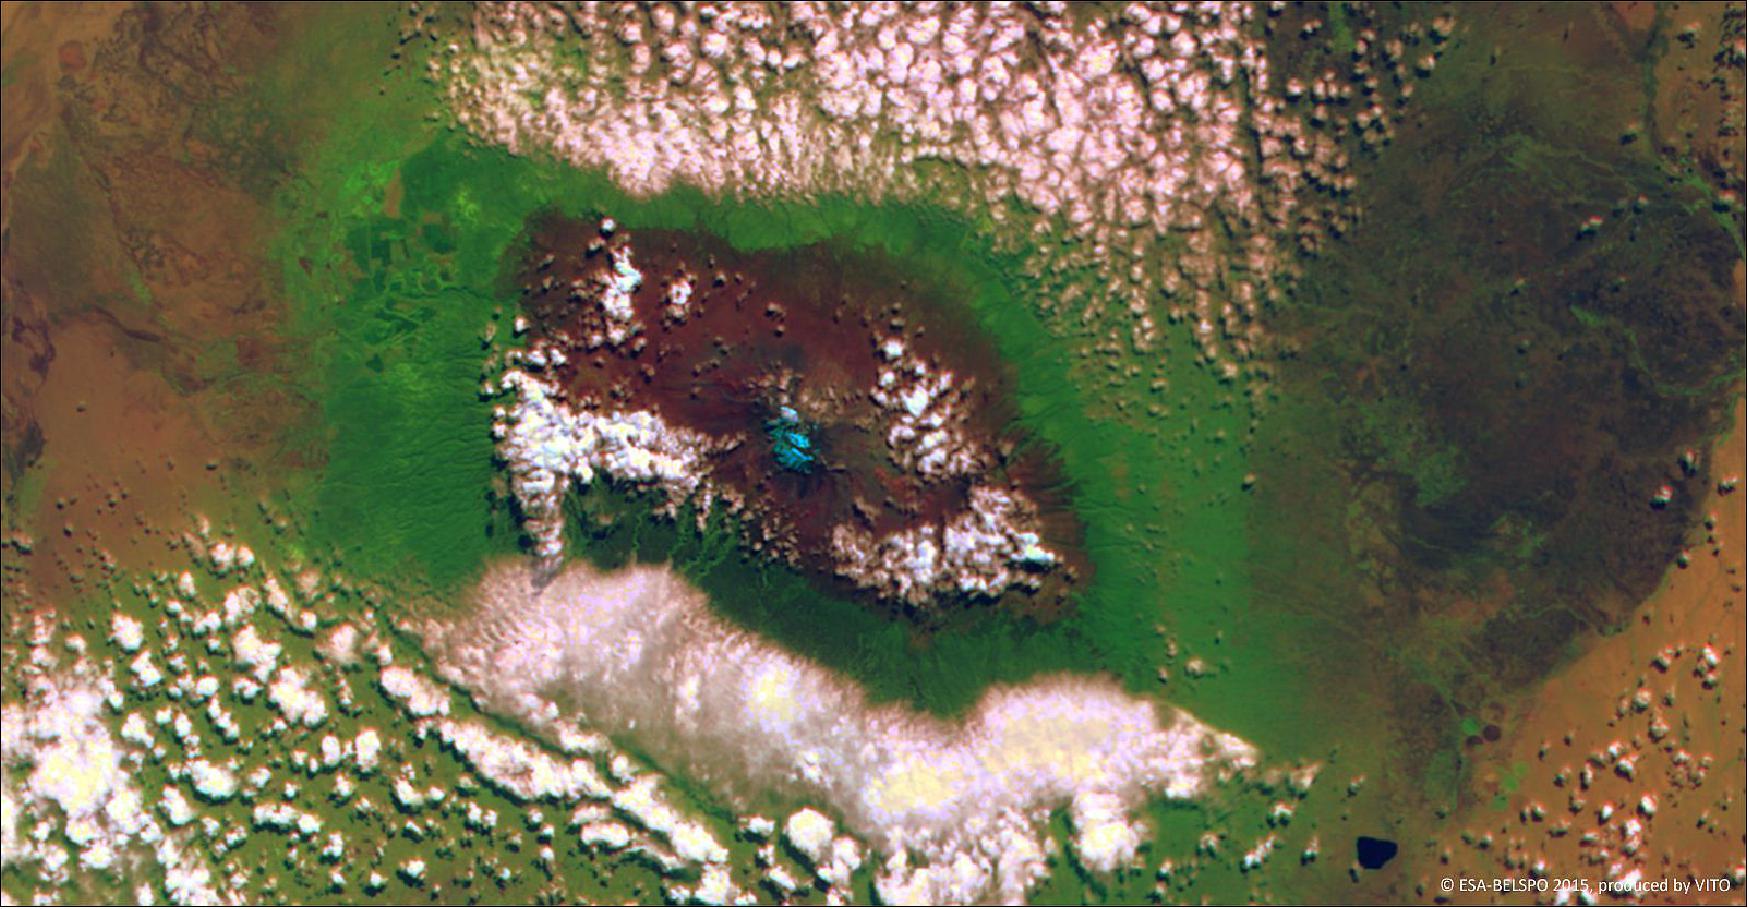 Figure 50: This 100 m resolution false-color image from PROBA-V's main Vegetation camera, acquired on 14 June 2015, shows Kilimanjaro enveloped by clouds to the south and north. The gradual decrease of vegetation with altitude can be seen by the colors changing from green to brown and finally light blue, representing the summit's glacier (image credit: ESA, BelSPO, VITO)